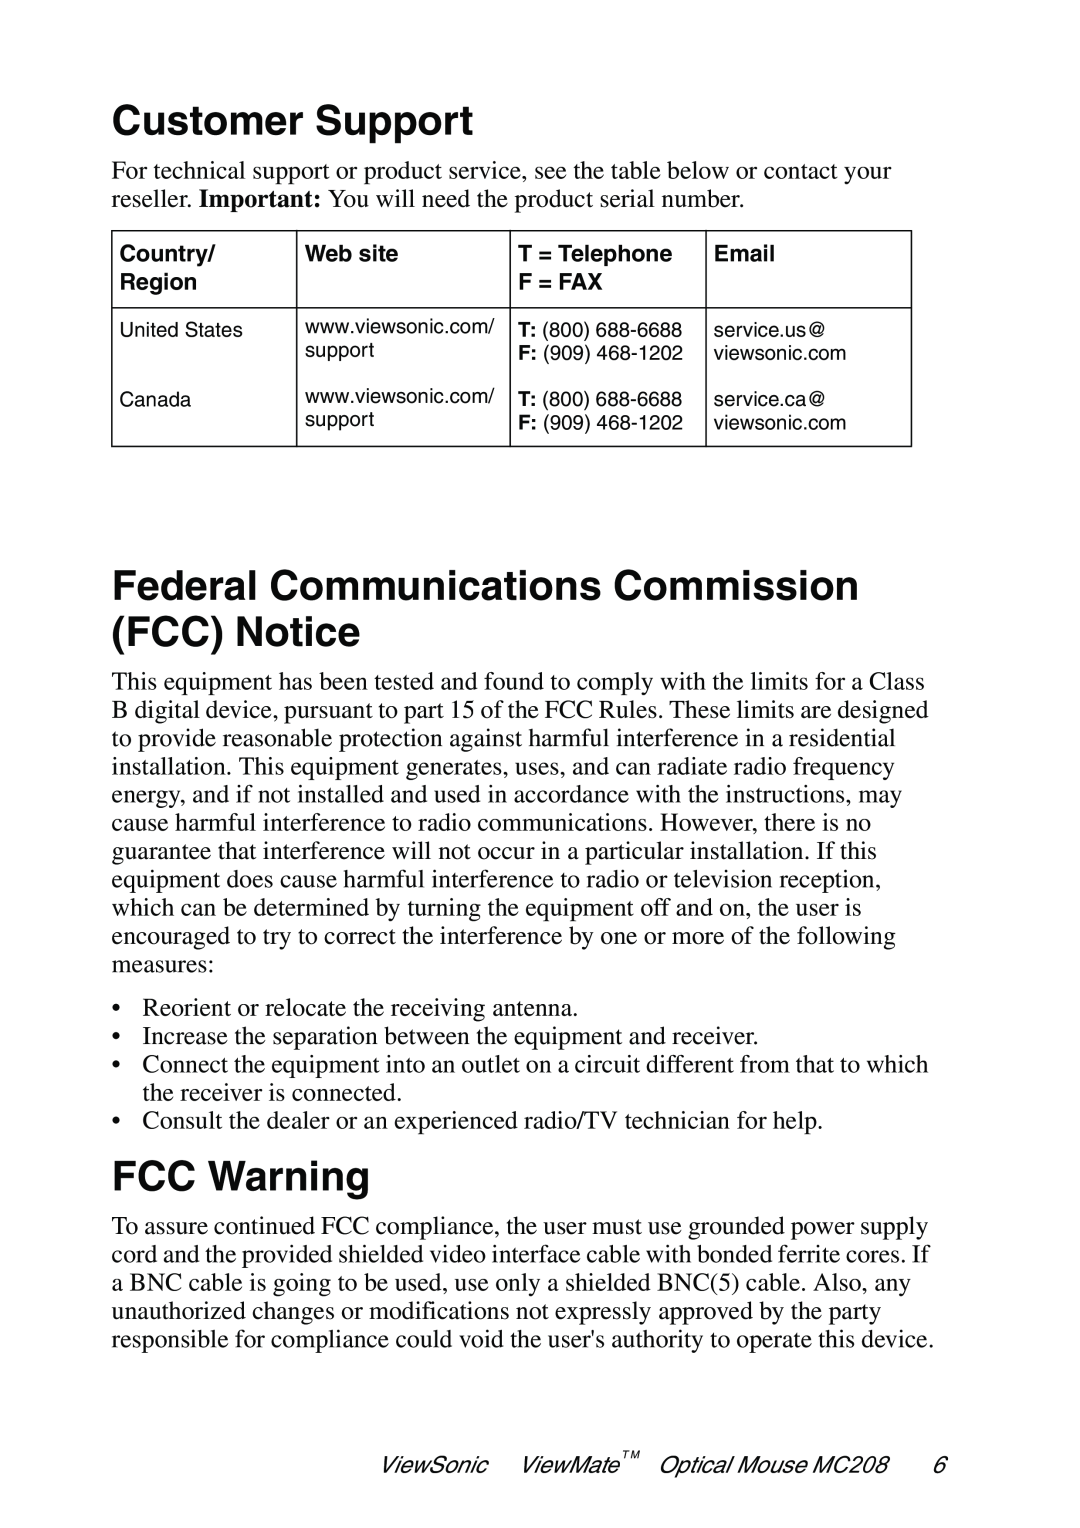 ViewSonic VS102127 manual Customer Support, Federal Communications Commission FCC Notice, FCC Warning 